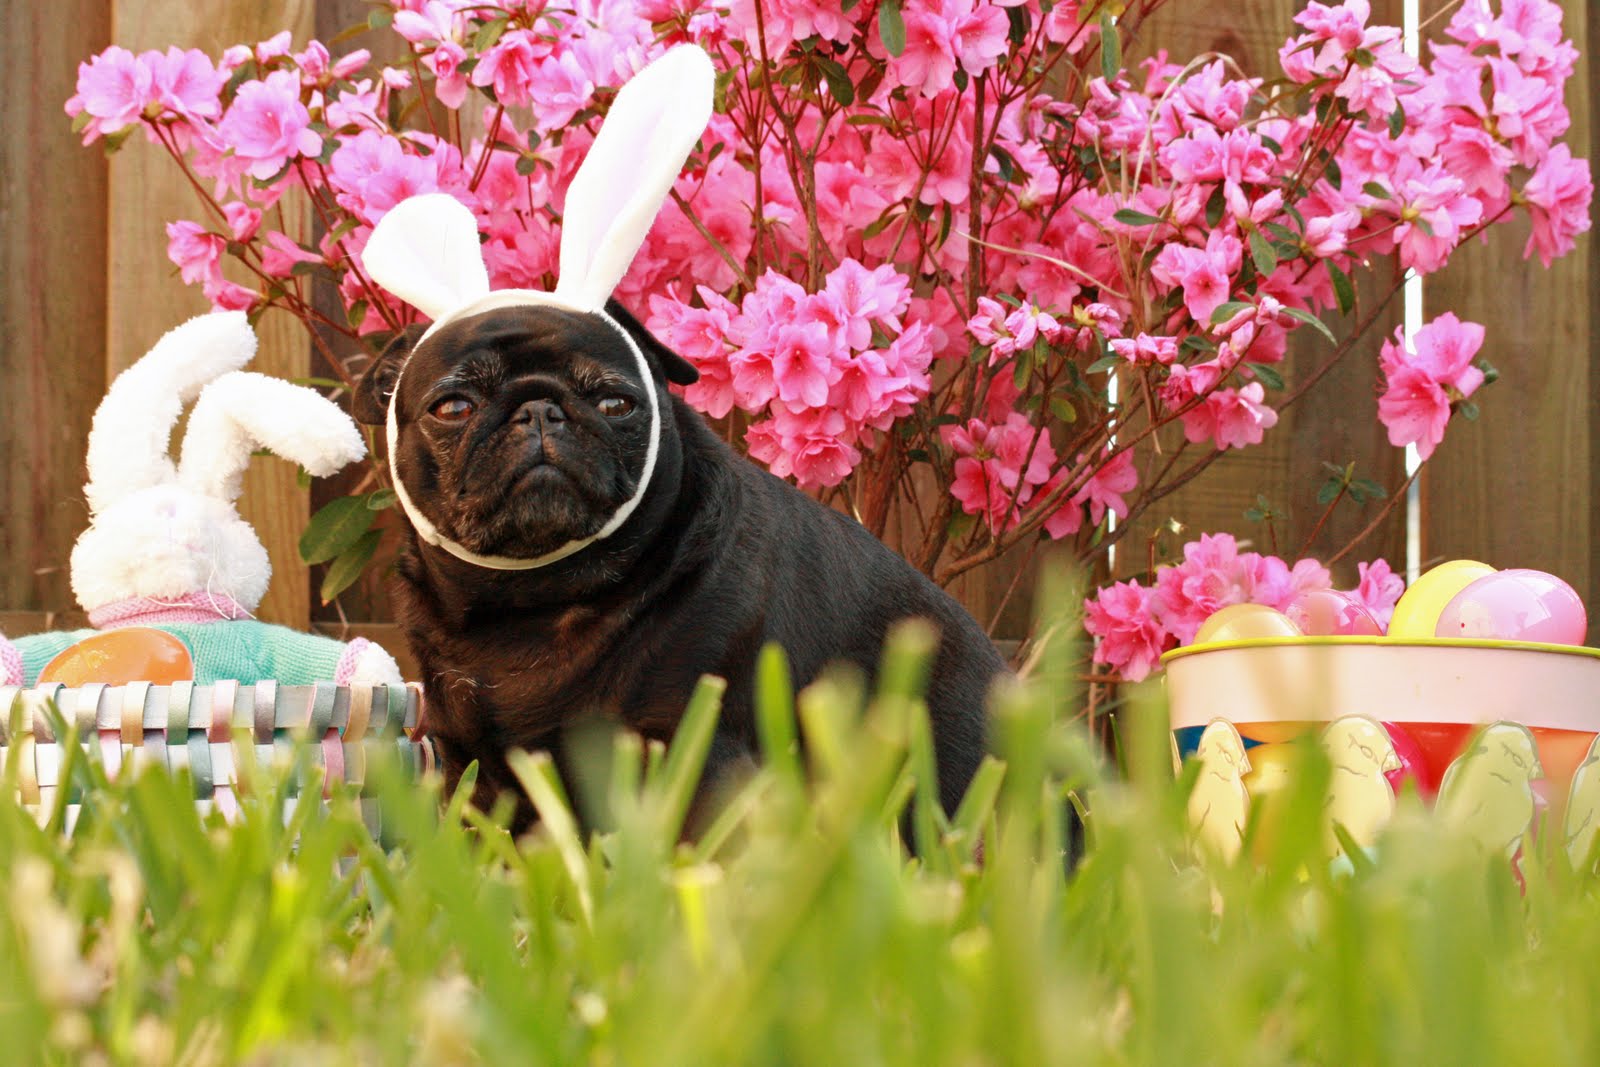 Easter Pug in the grass photo and wallpaper. Beautiful Easter Pug